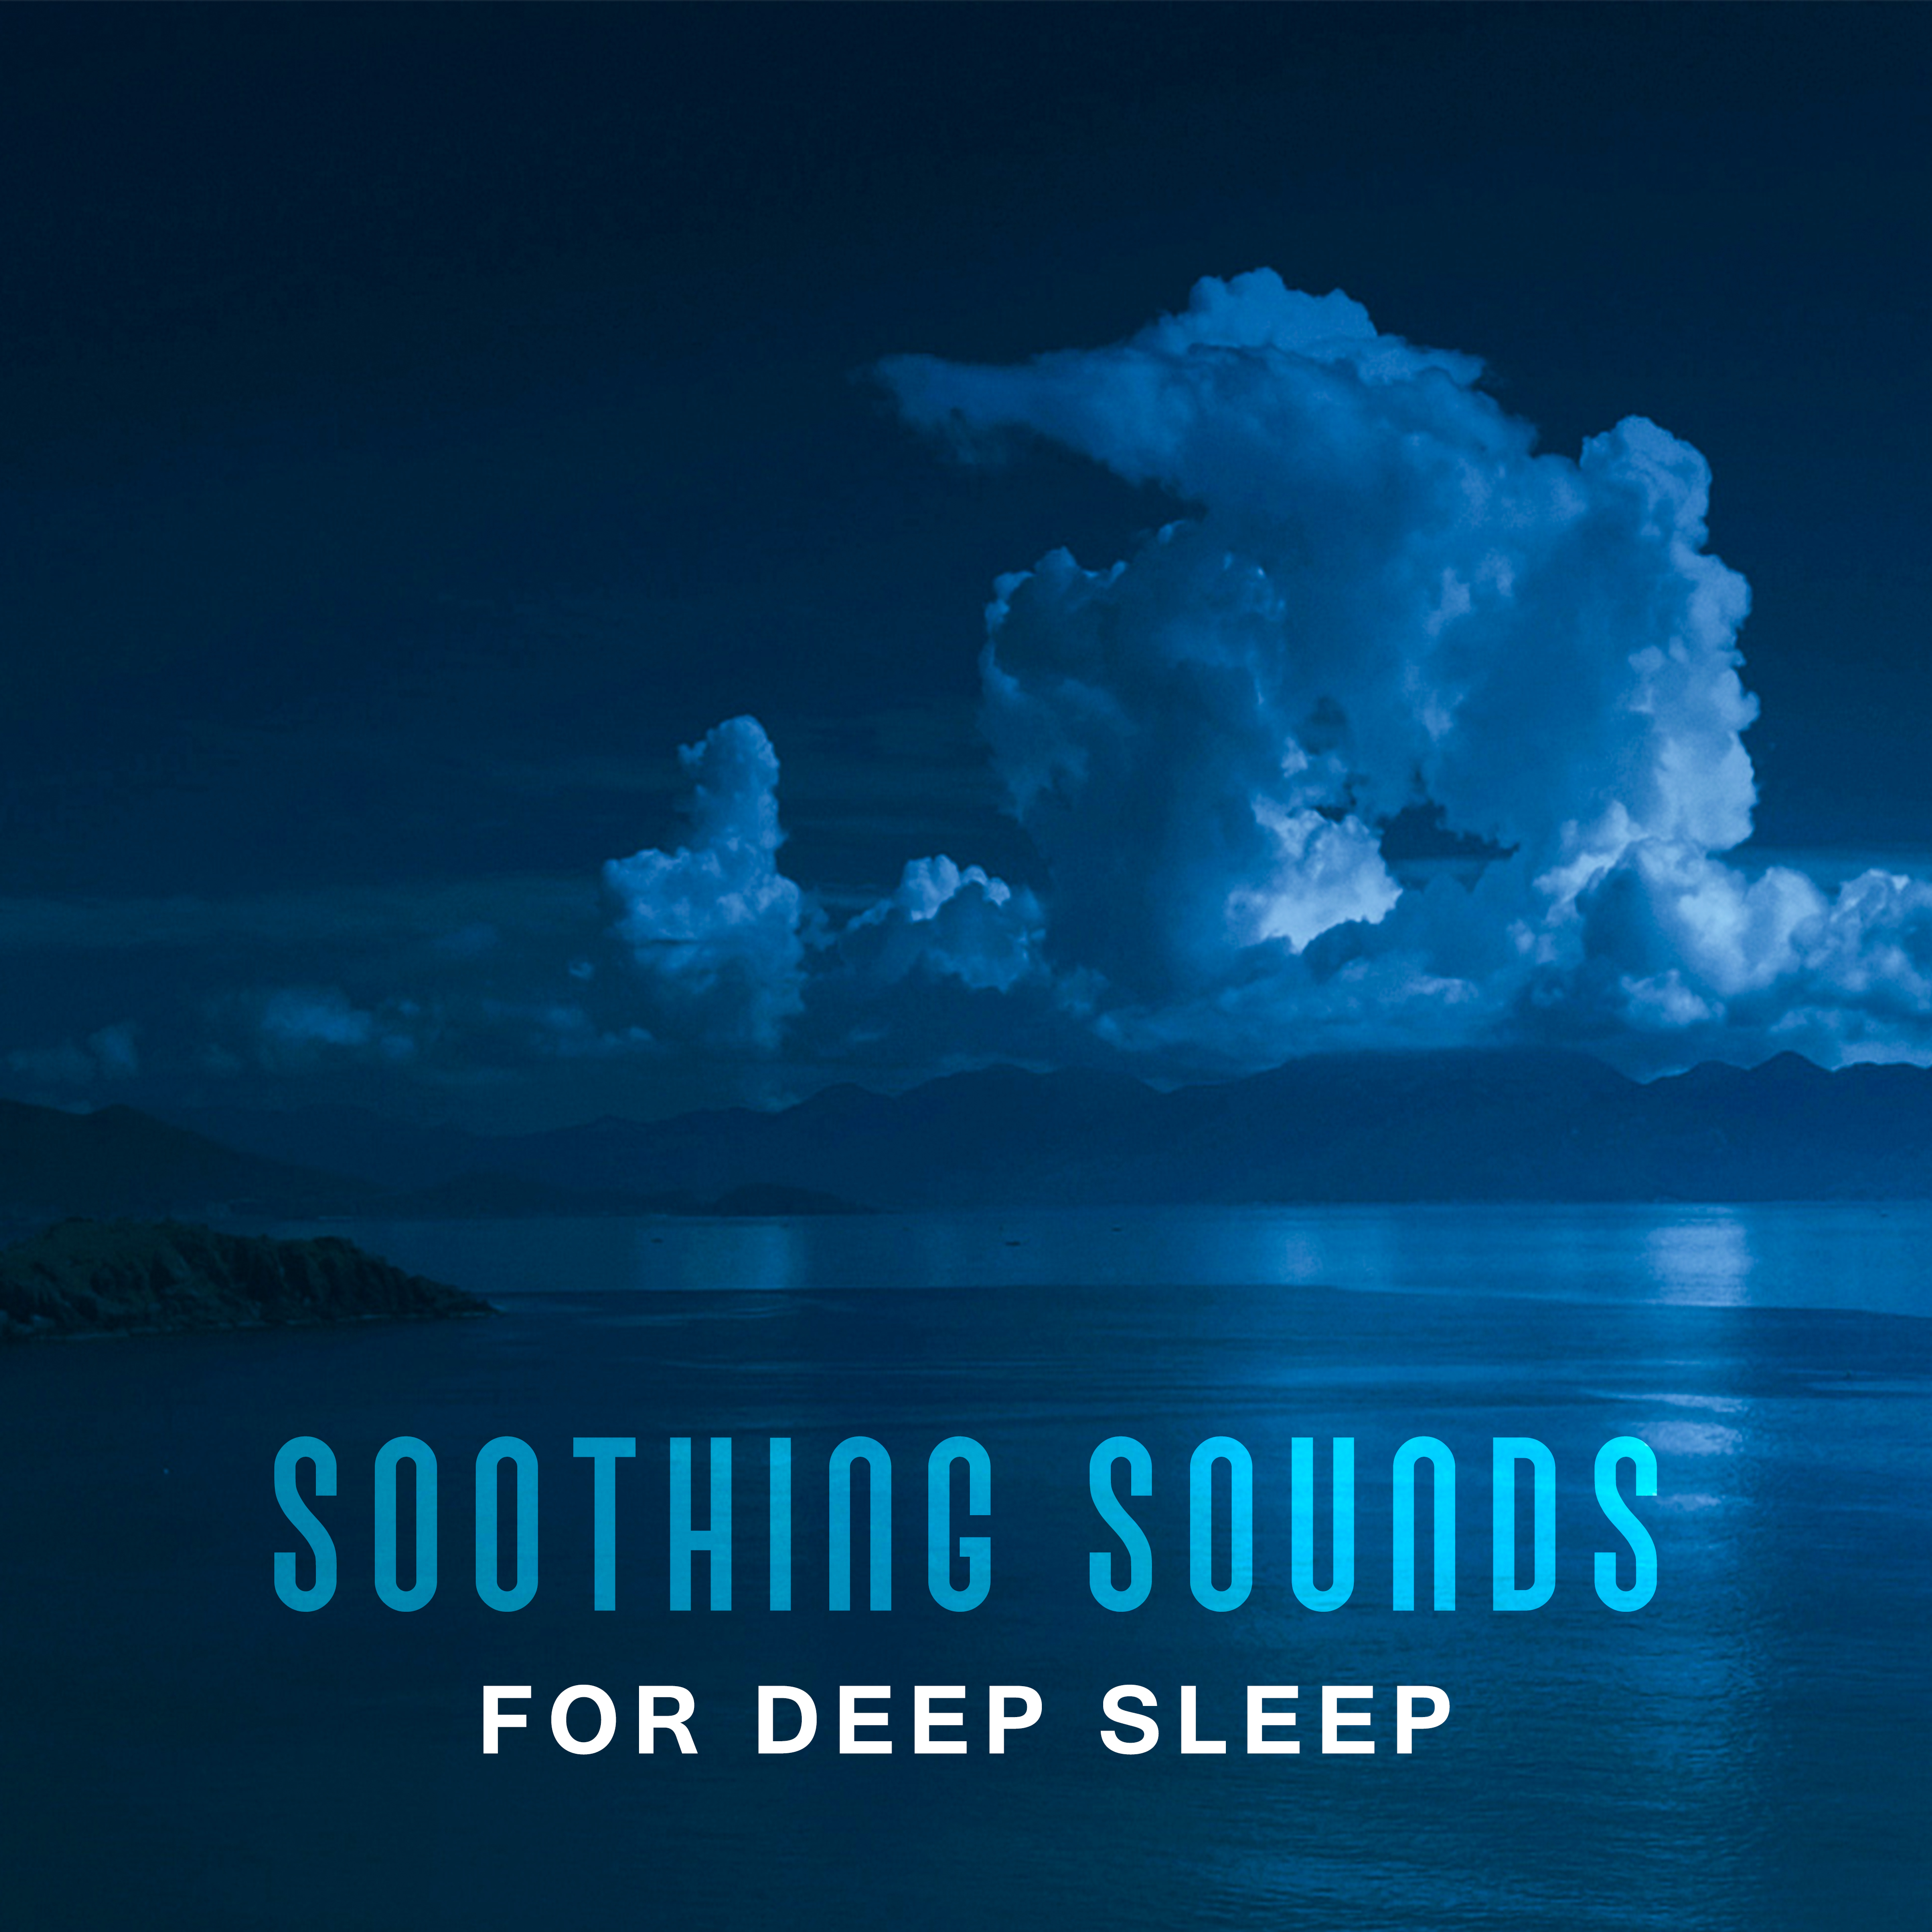 Soothing Sounds for Deep Sleep – Calming Nature Waves, Healing Sounds, New Age Relaxation, Stress Relief